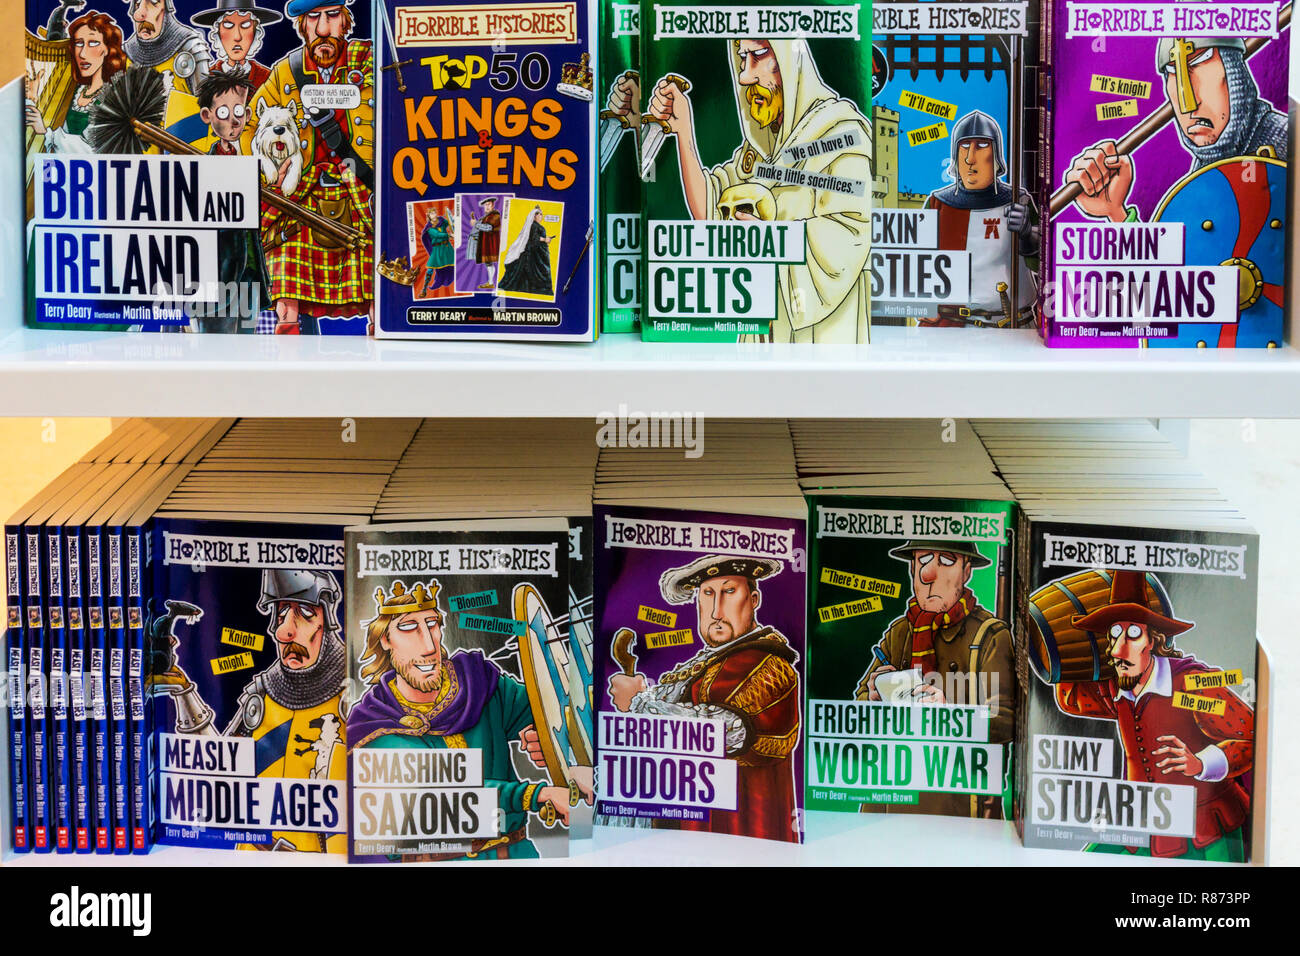 A selection of Horrible Histories books for sale, by Terry Deary & Martin Brown. Stock Photo